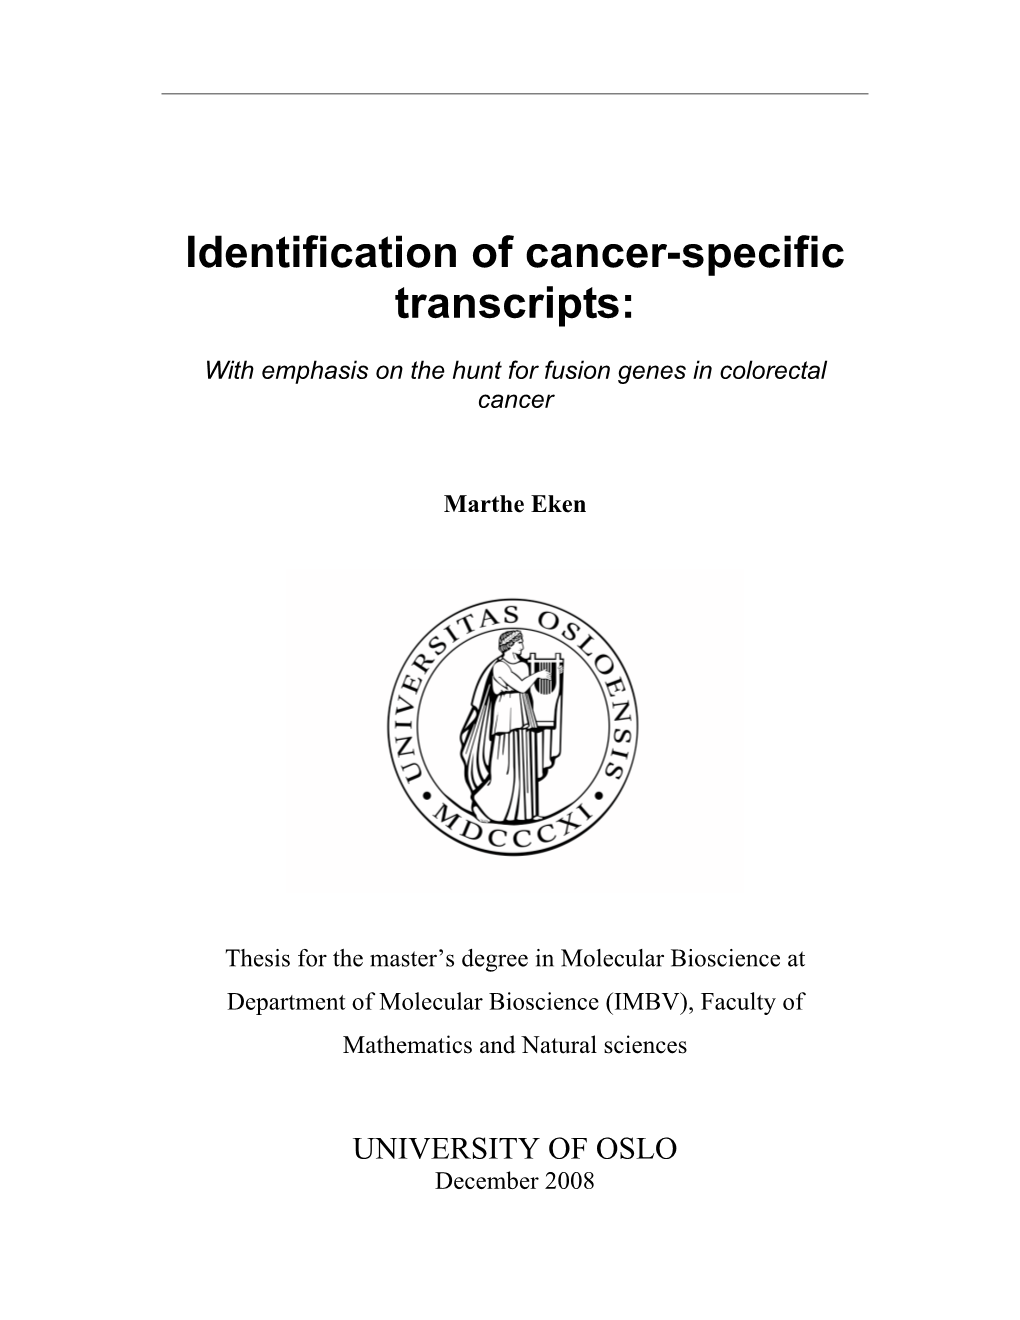 Identification of Cancer-Specific Transcripts